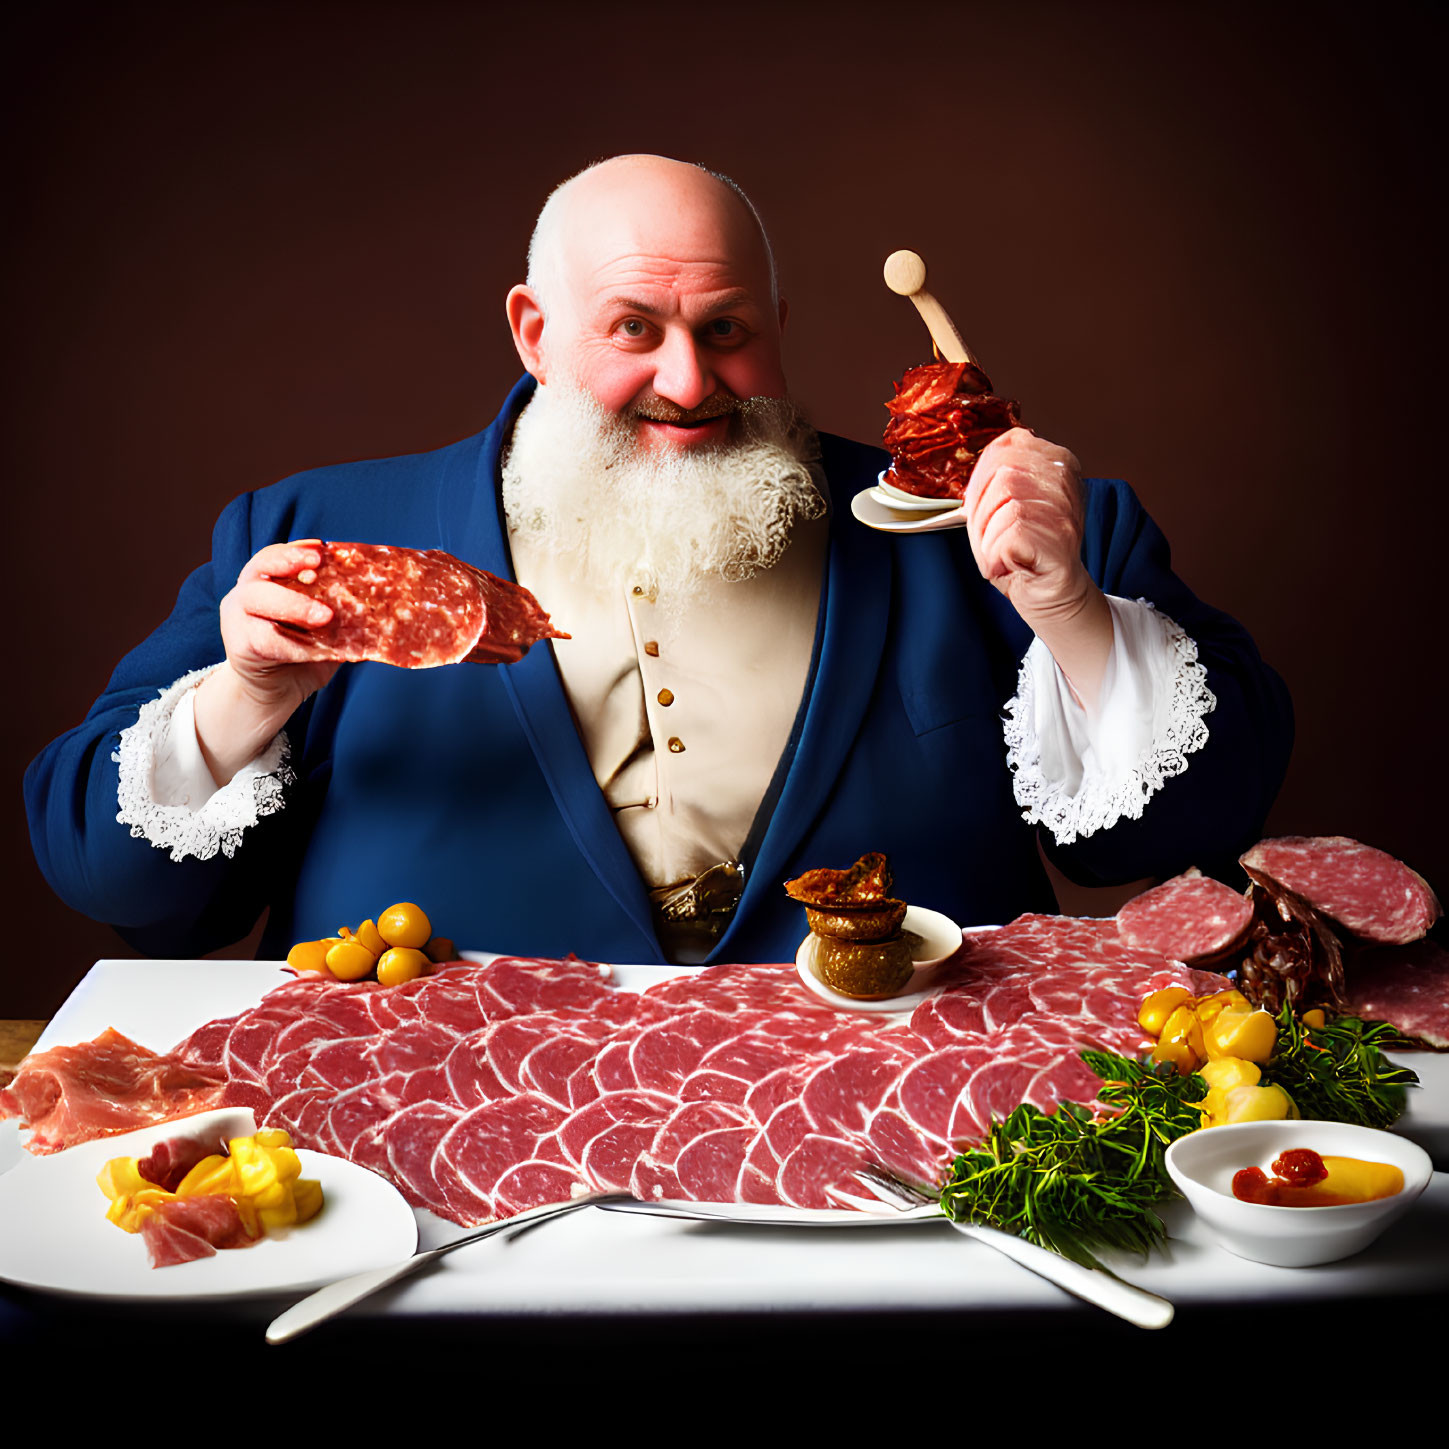 Bearded man in blue jacket with salami slice and assorted meats on dark background